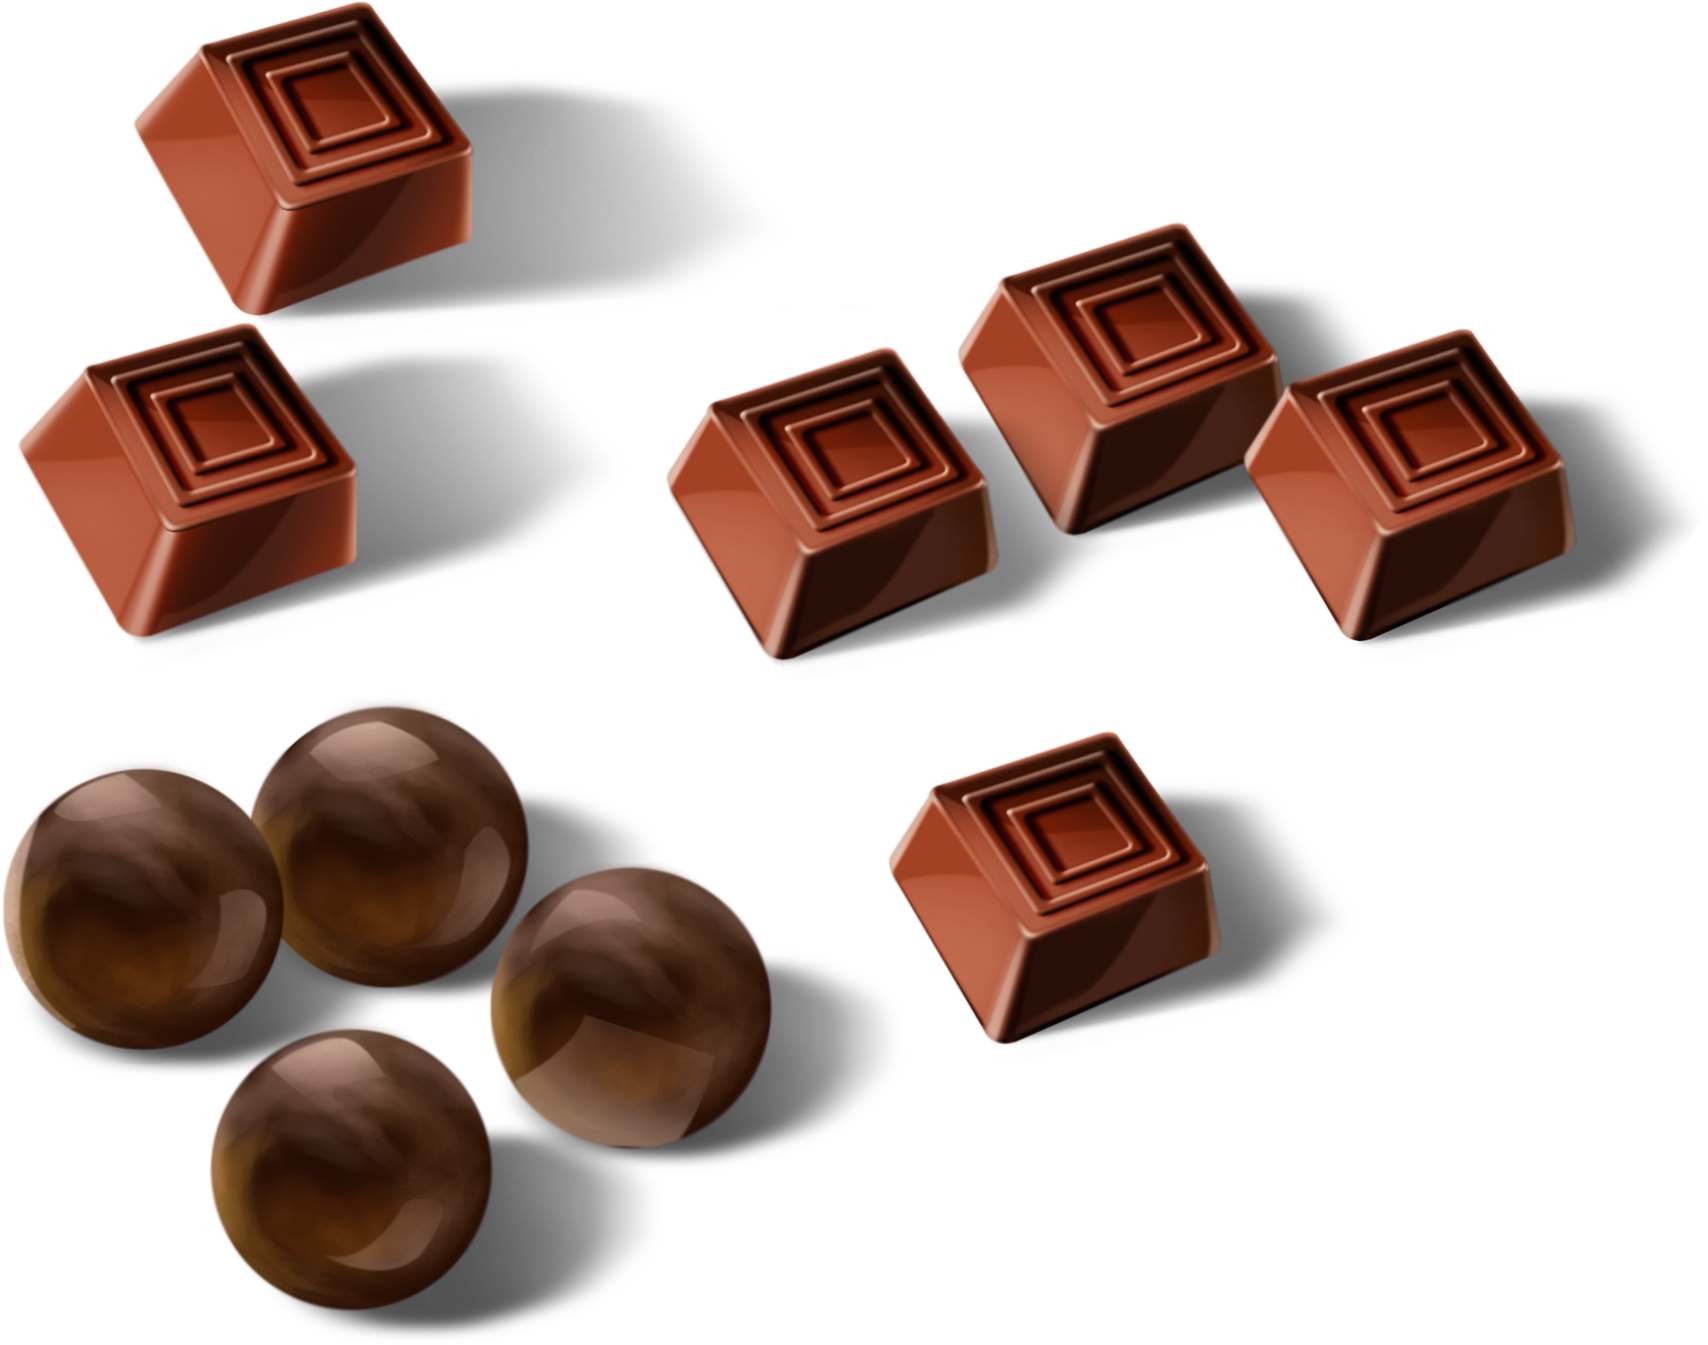 Chocolate Png Image Purepng Free Transparent Cc0 Png Image Library